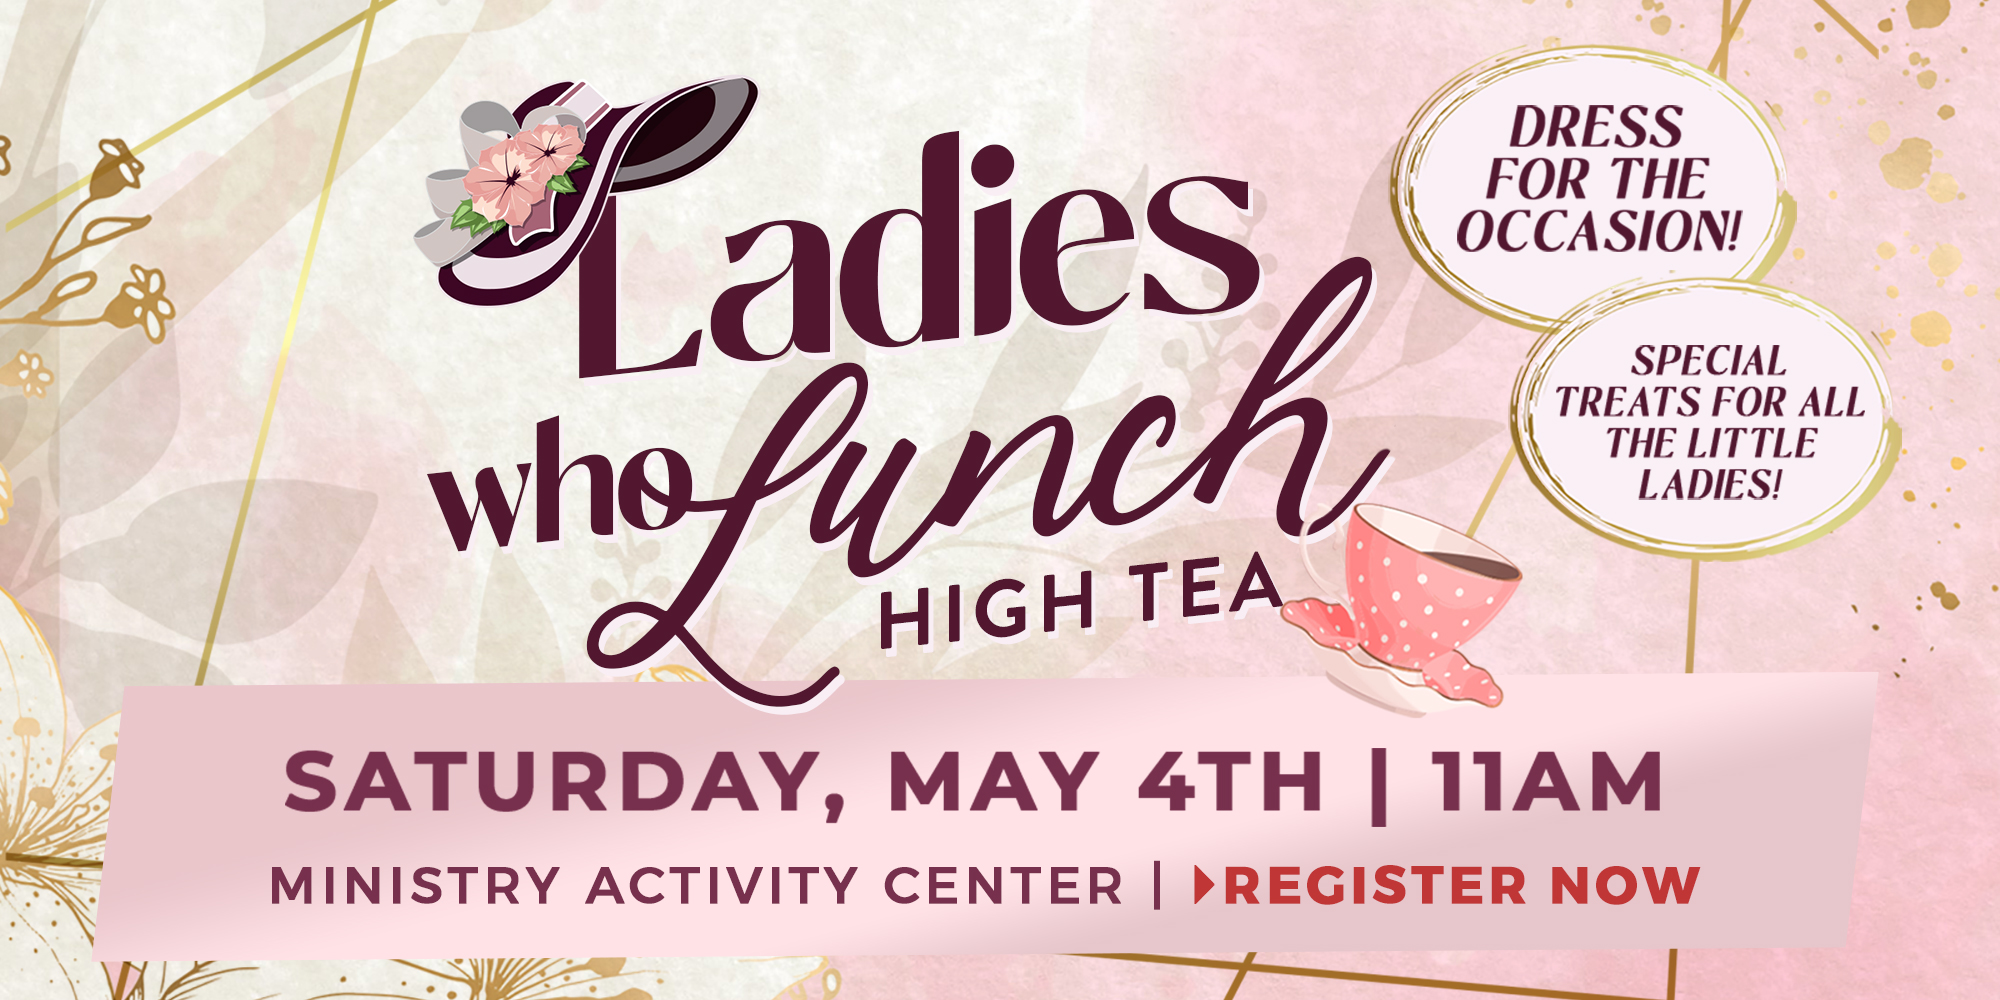 Ladies Who Lunch High Tea Dress for the Occasion! Special Treats for all the little ladies! Saturday, May 4th | 11am Ministry Activity Center | Register Now